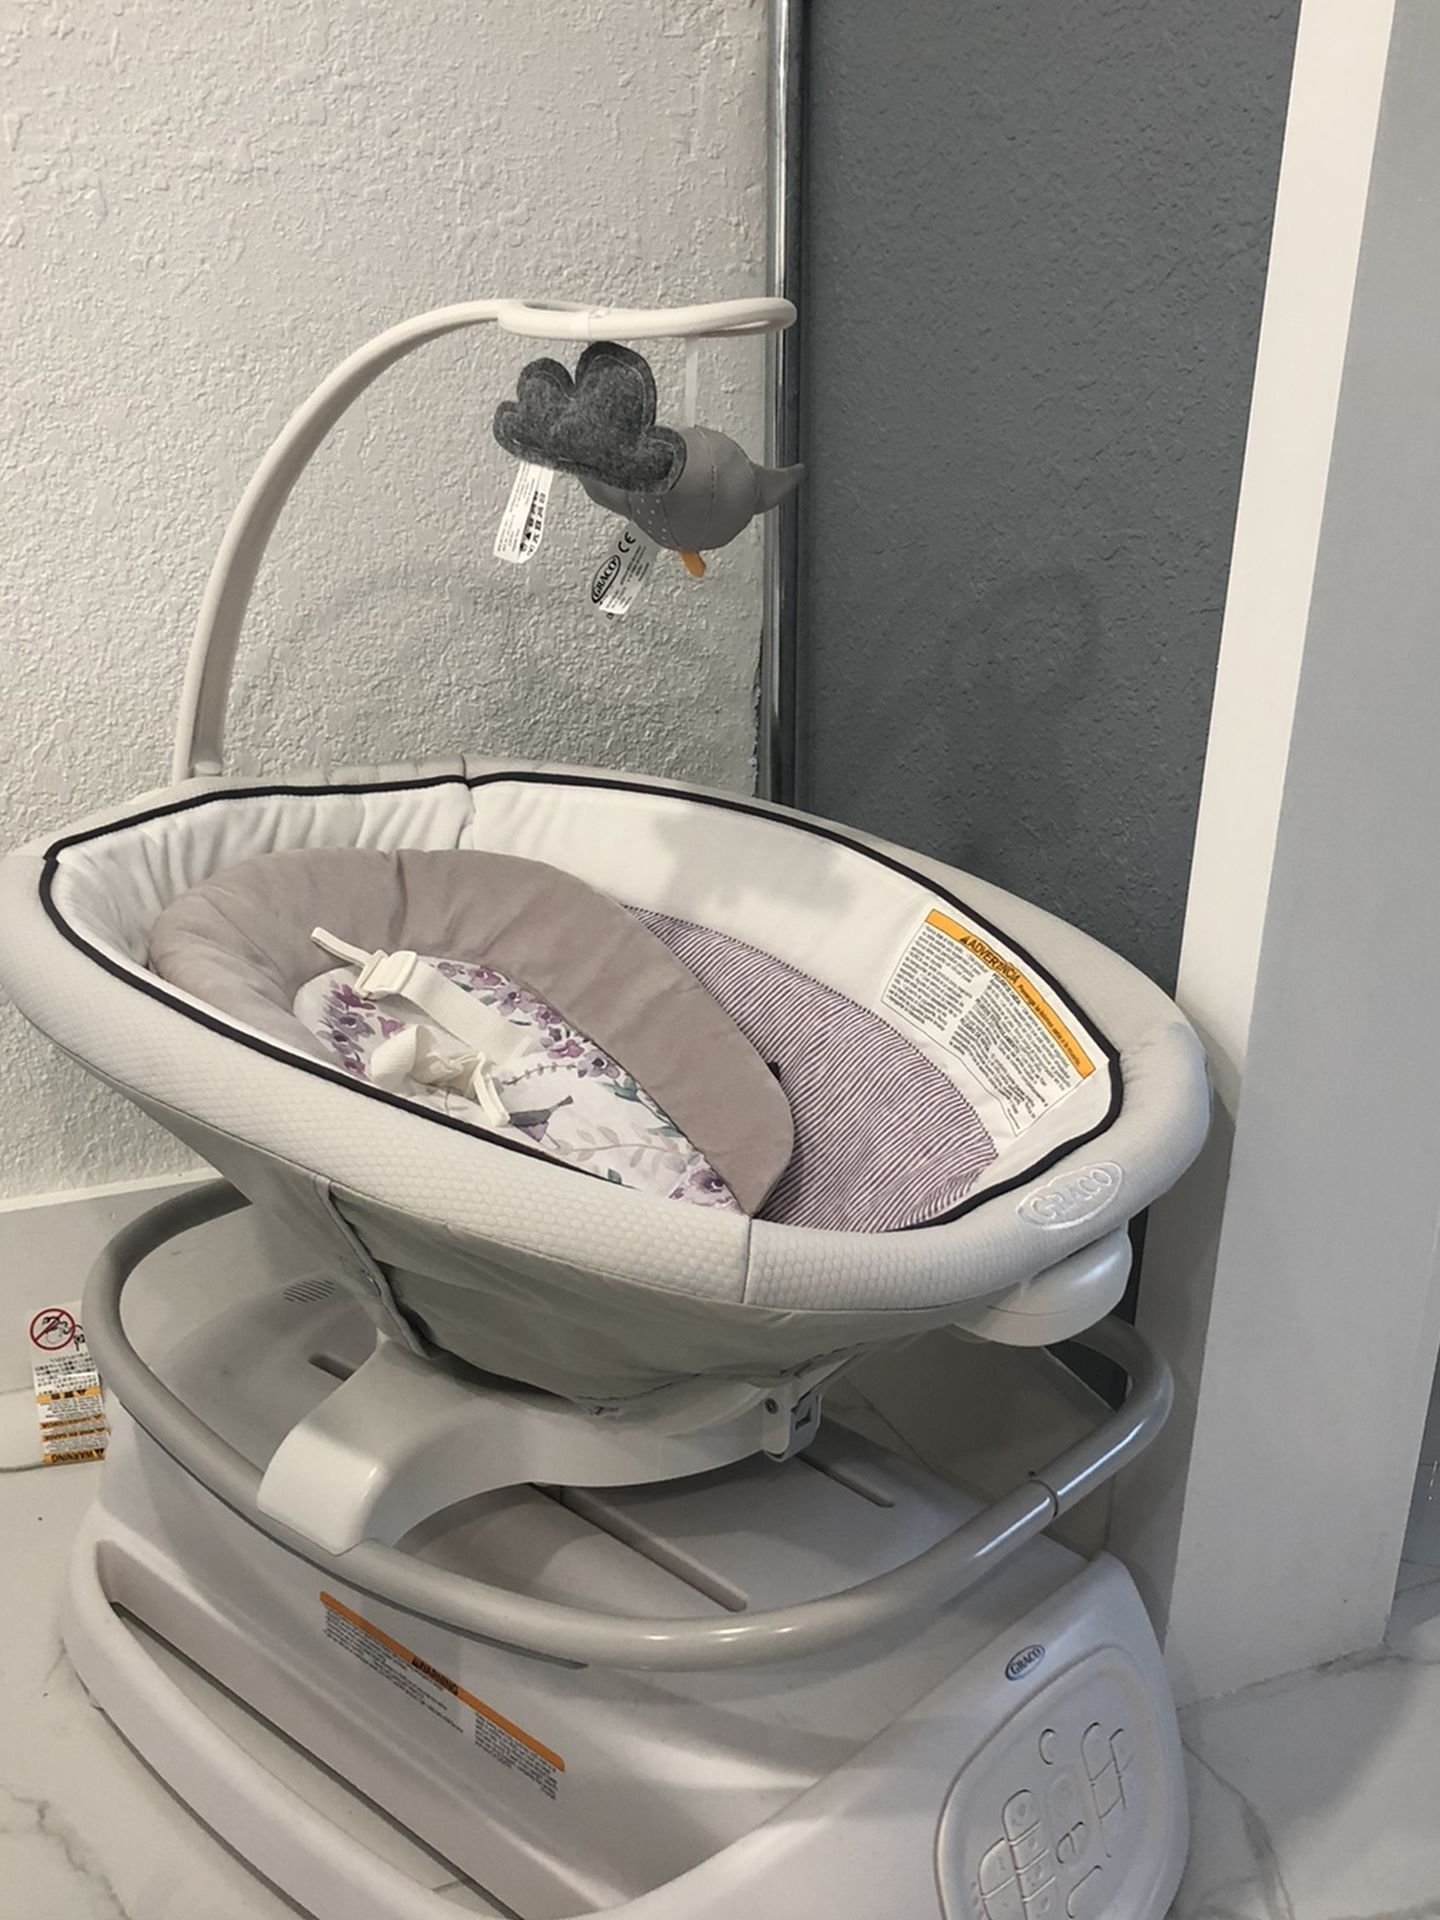 Graco® Sense2Soothe™ Swing with Cry Detection™ Technology